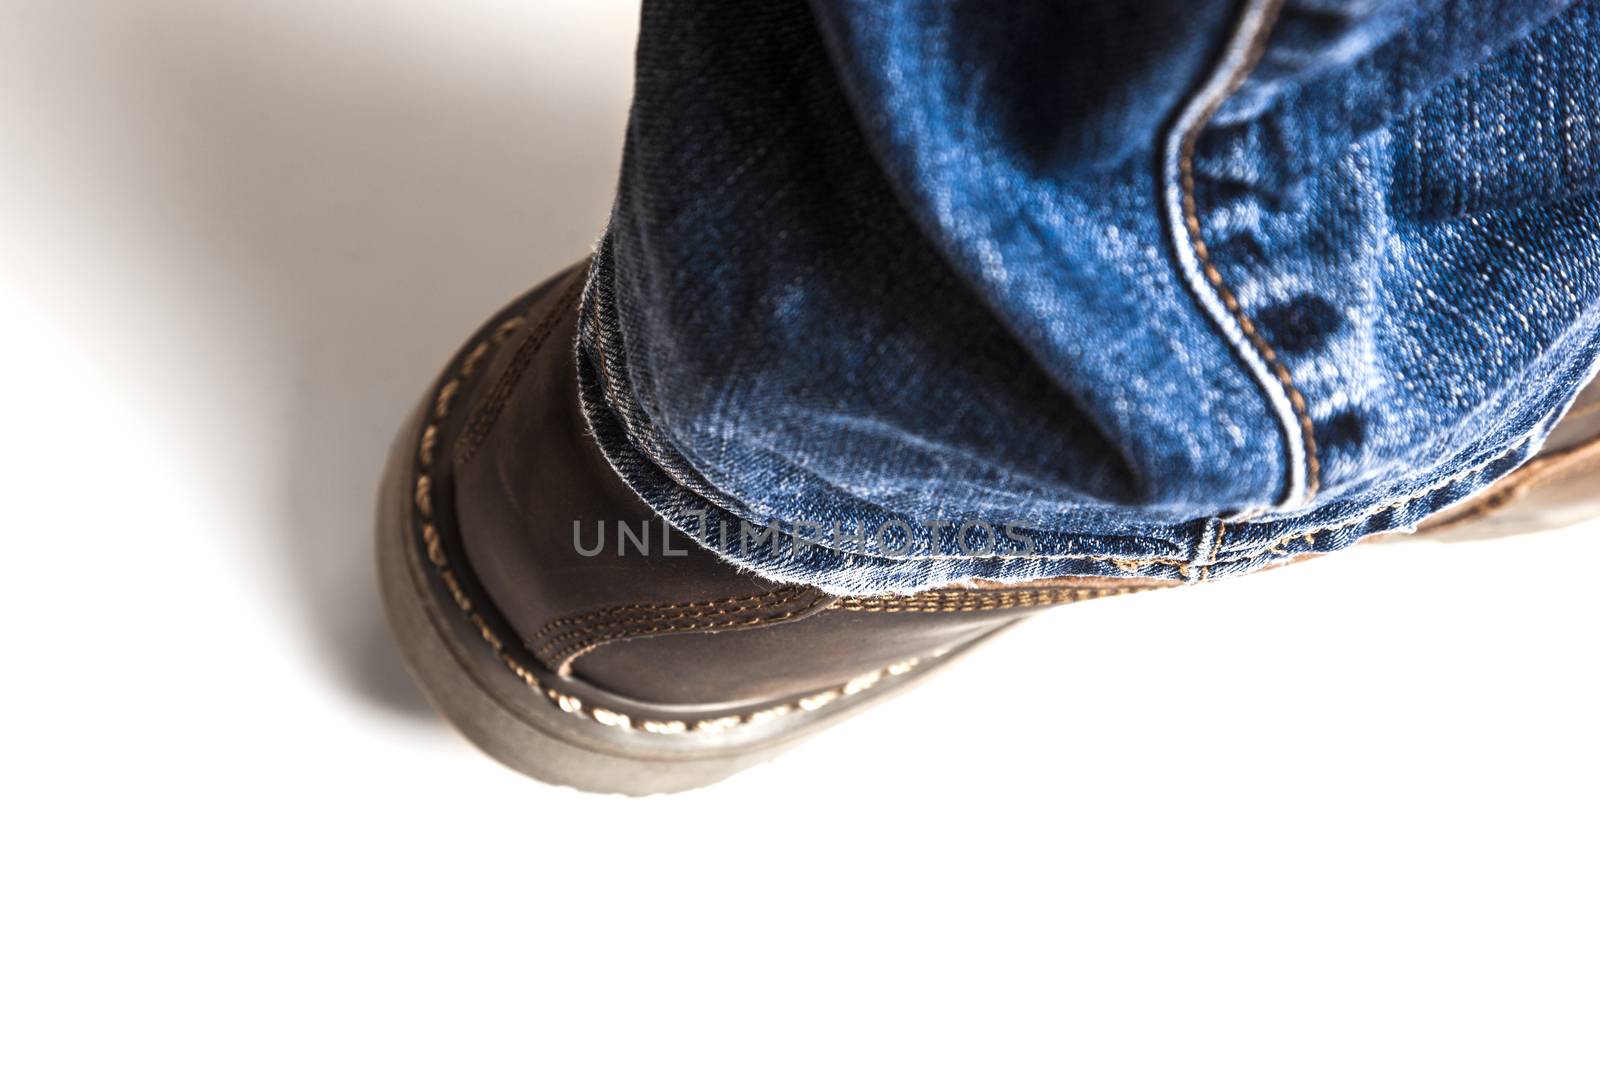 Men's brown boots and blue jeans isolated by SlayCer